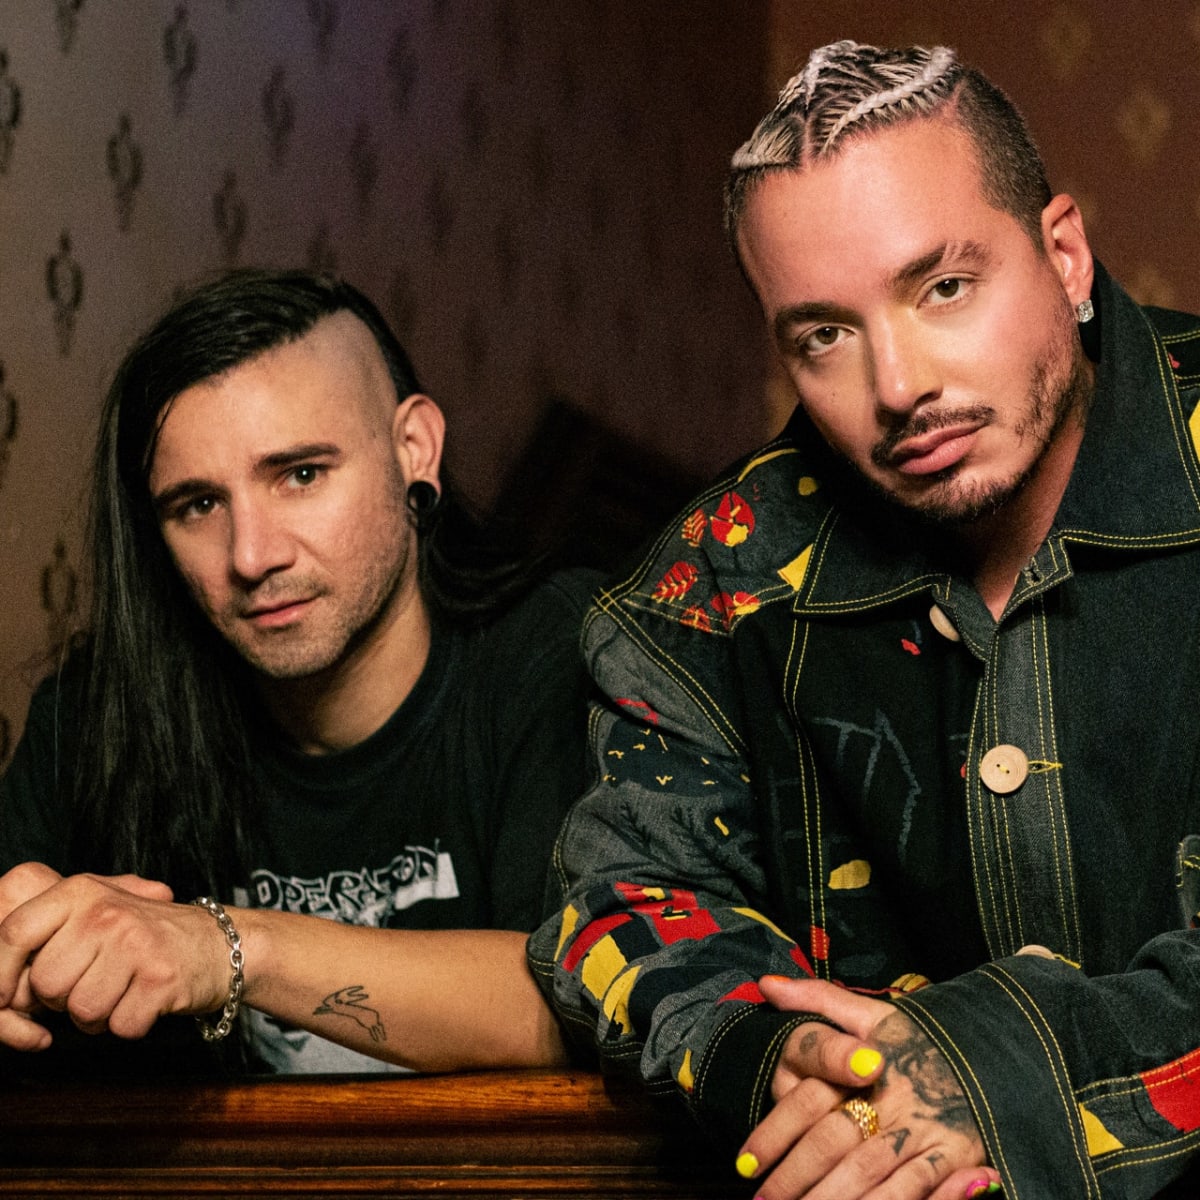 Watch Skrillex and J Balvin Party Hard in Video for New Collab